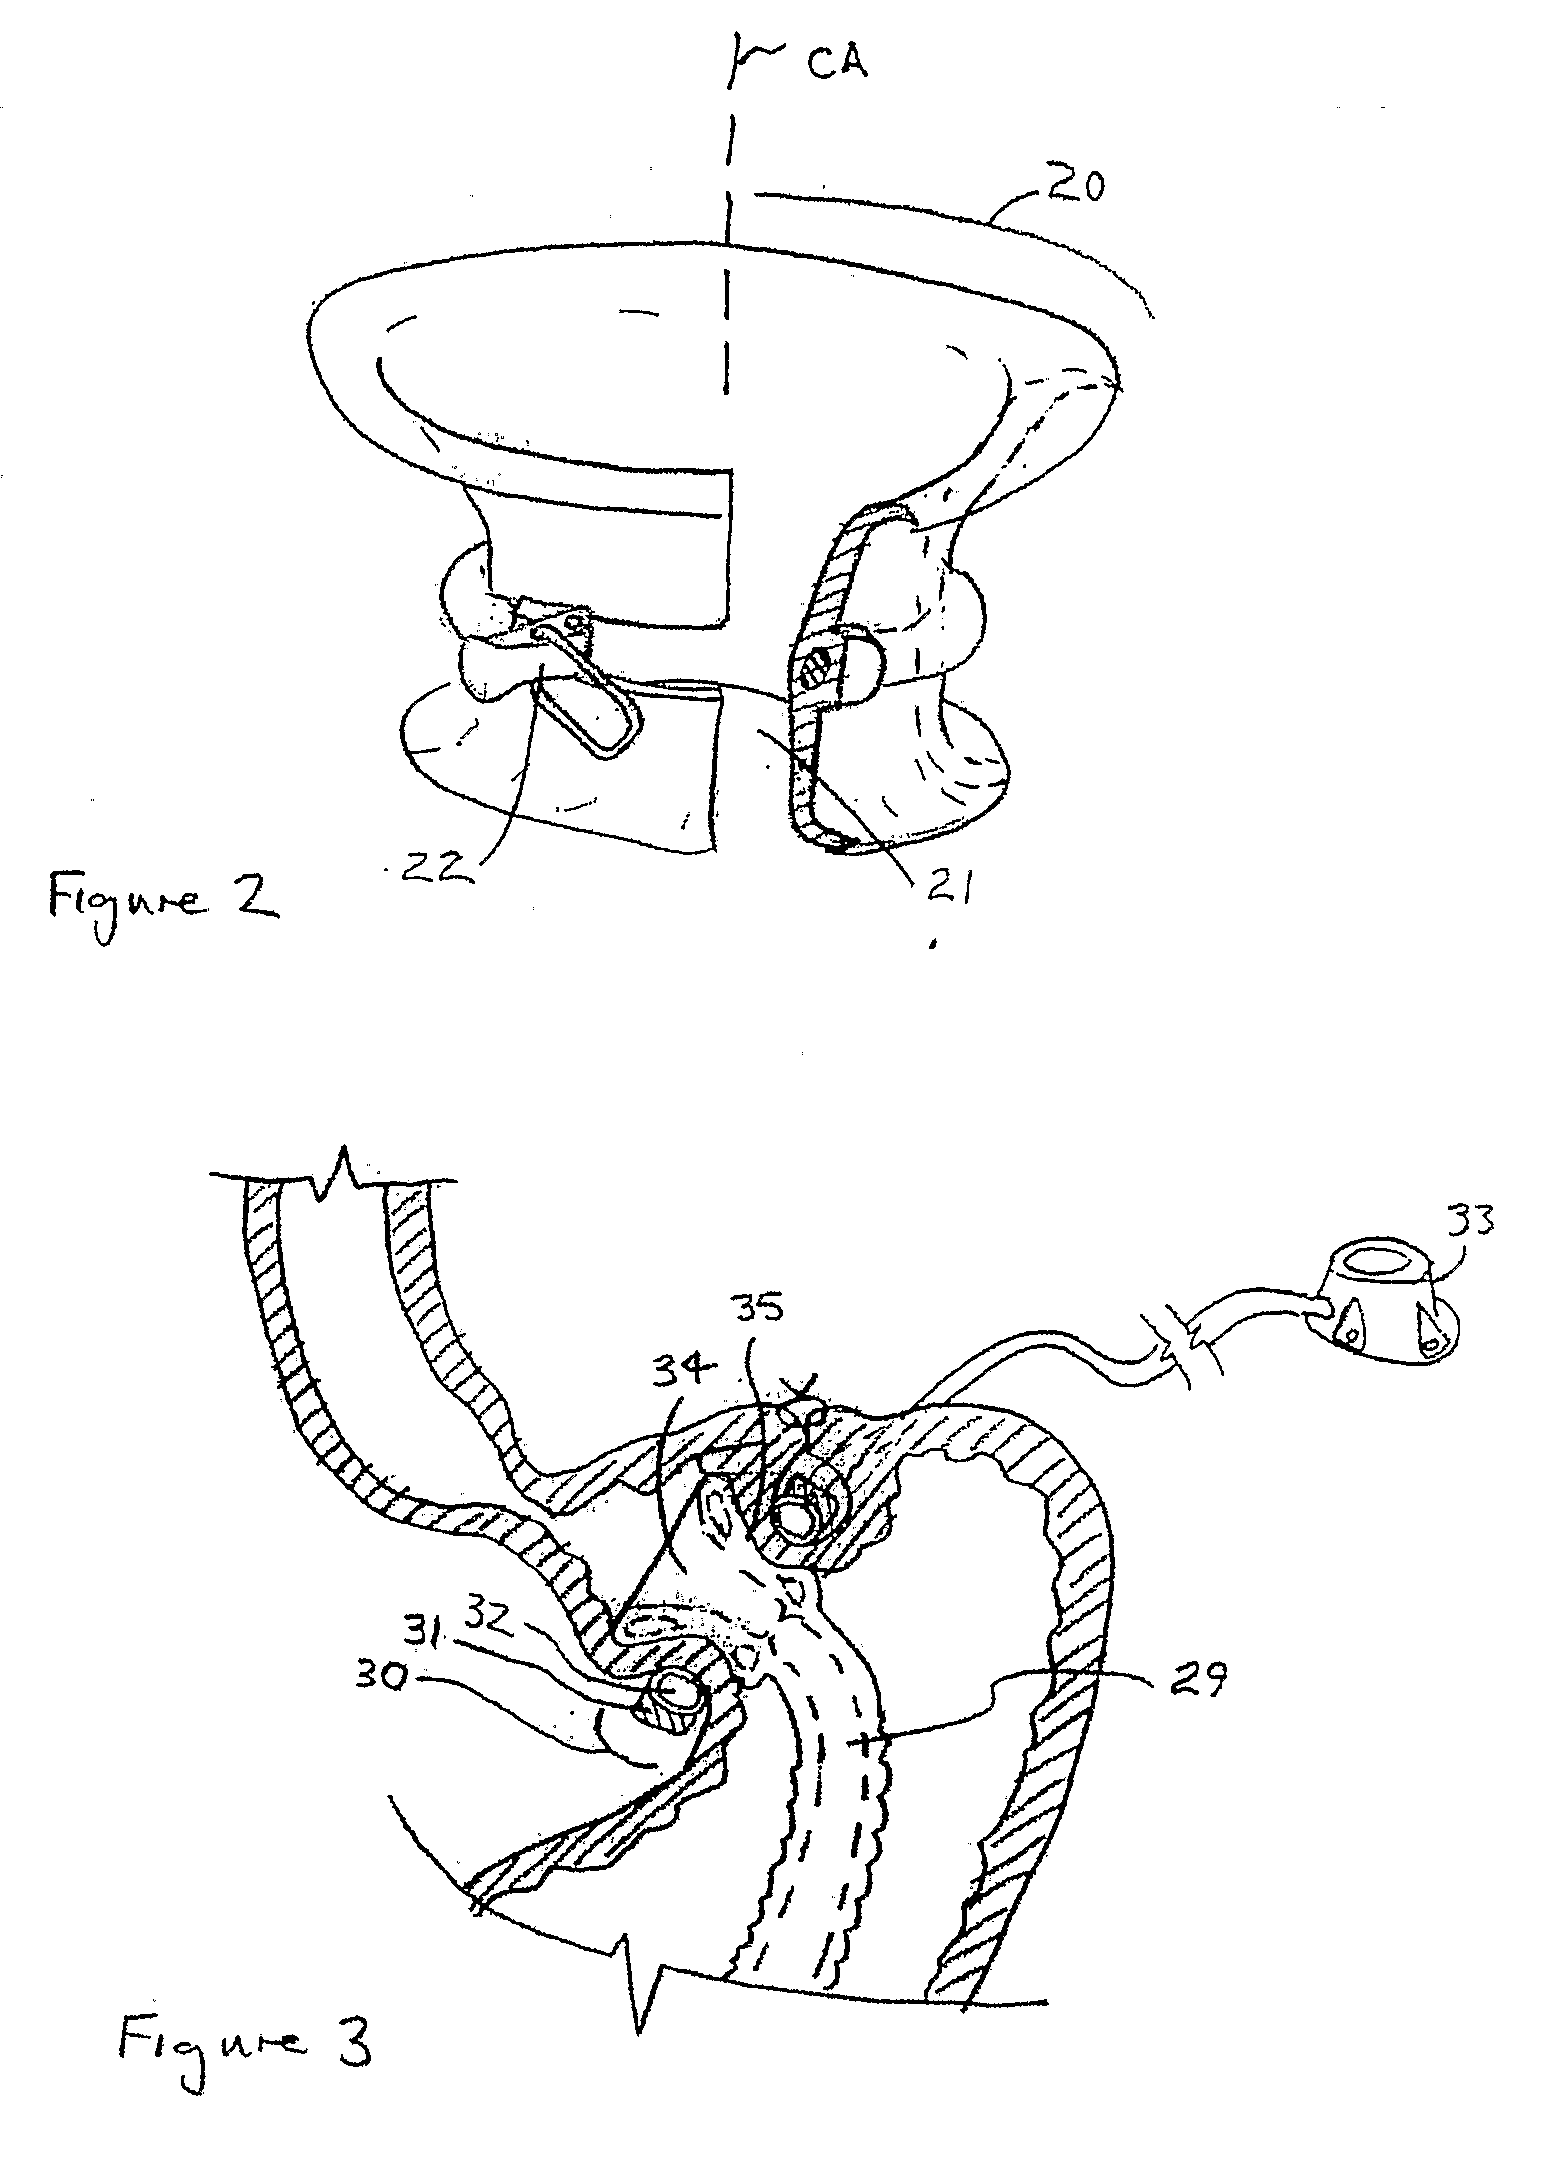 Gastric bypass prosthesis fixation system and method for treatment of obesity